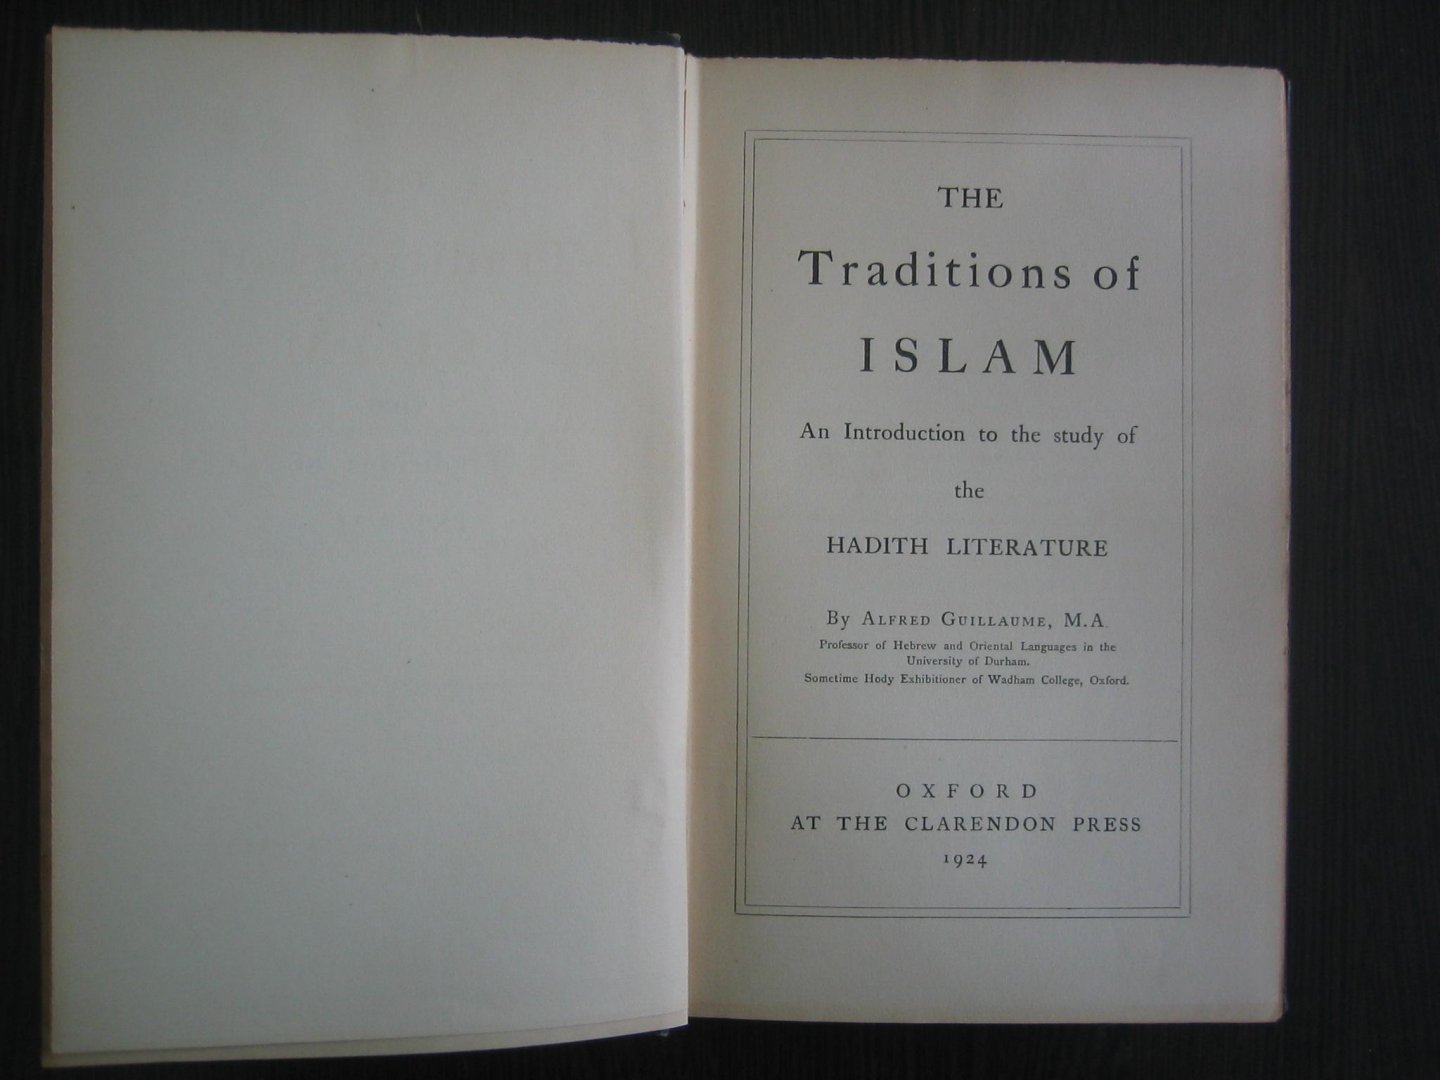 Guillaume, Alfred - The Traditions of Islam. An Introduction to the study of the Hadith Literature